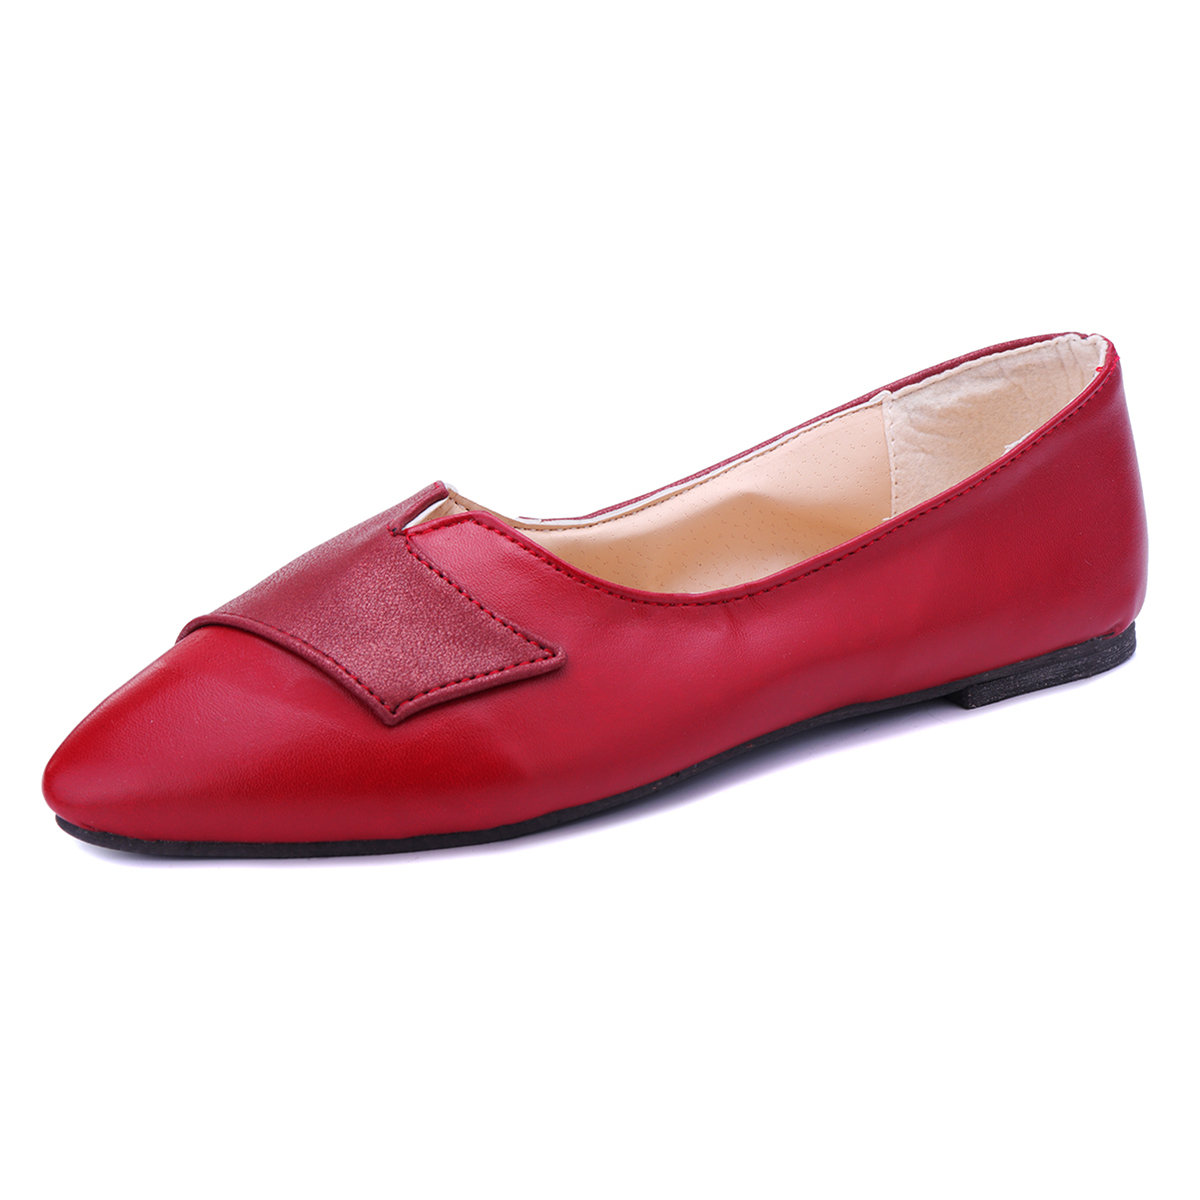 

Large Size Hear-Shaped Flats, Grey pink black red